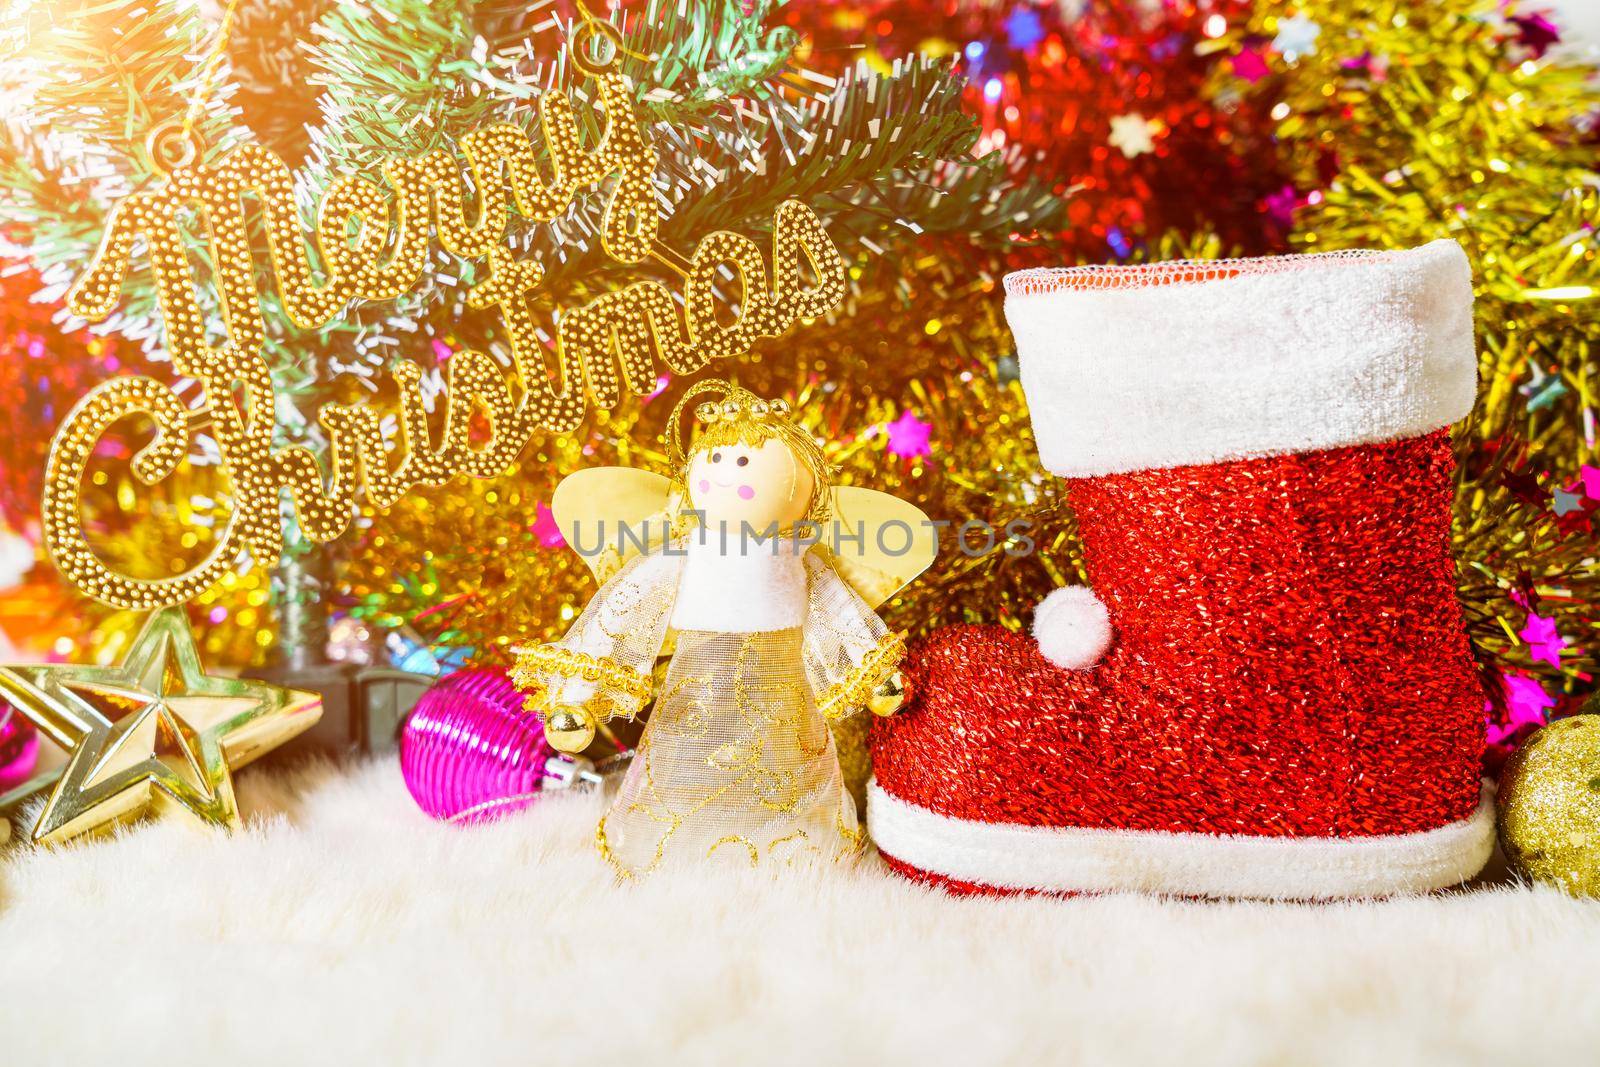 Red Santa claus boot and chrismas doll  by stoonn